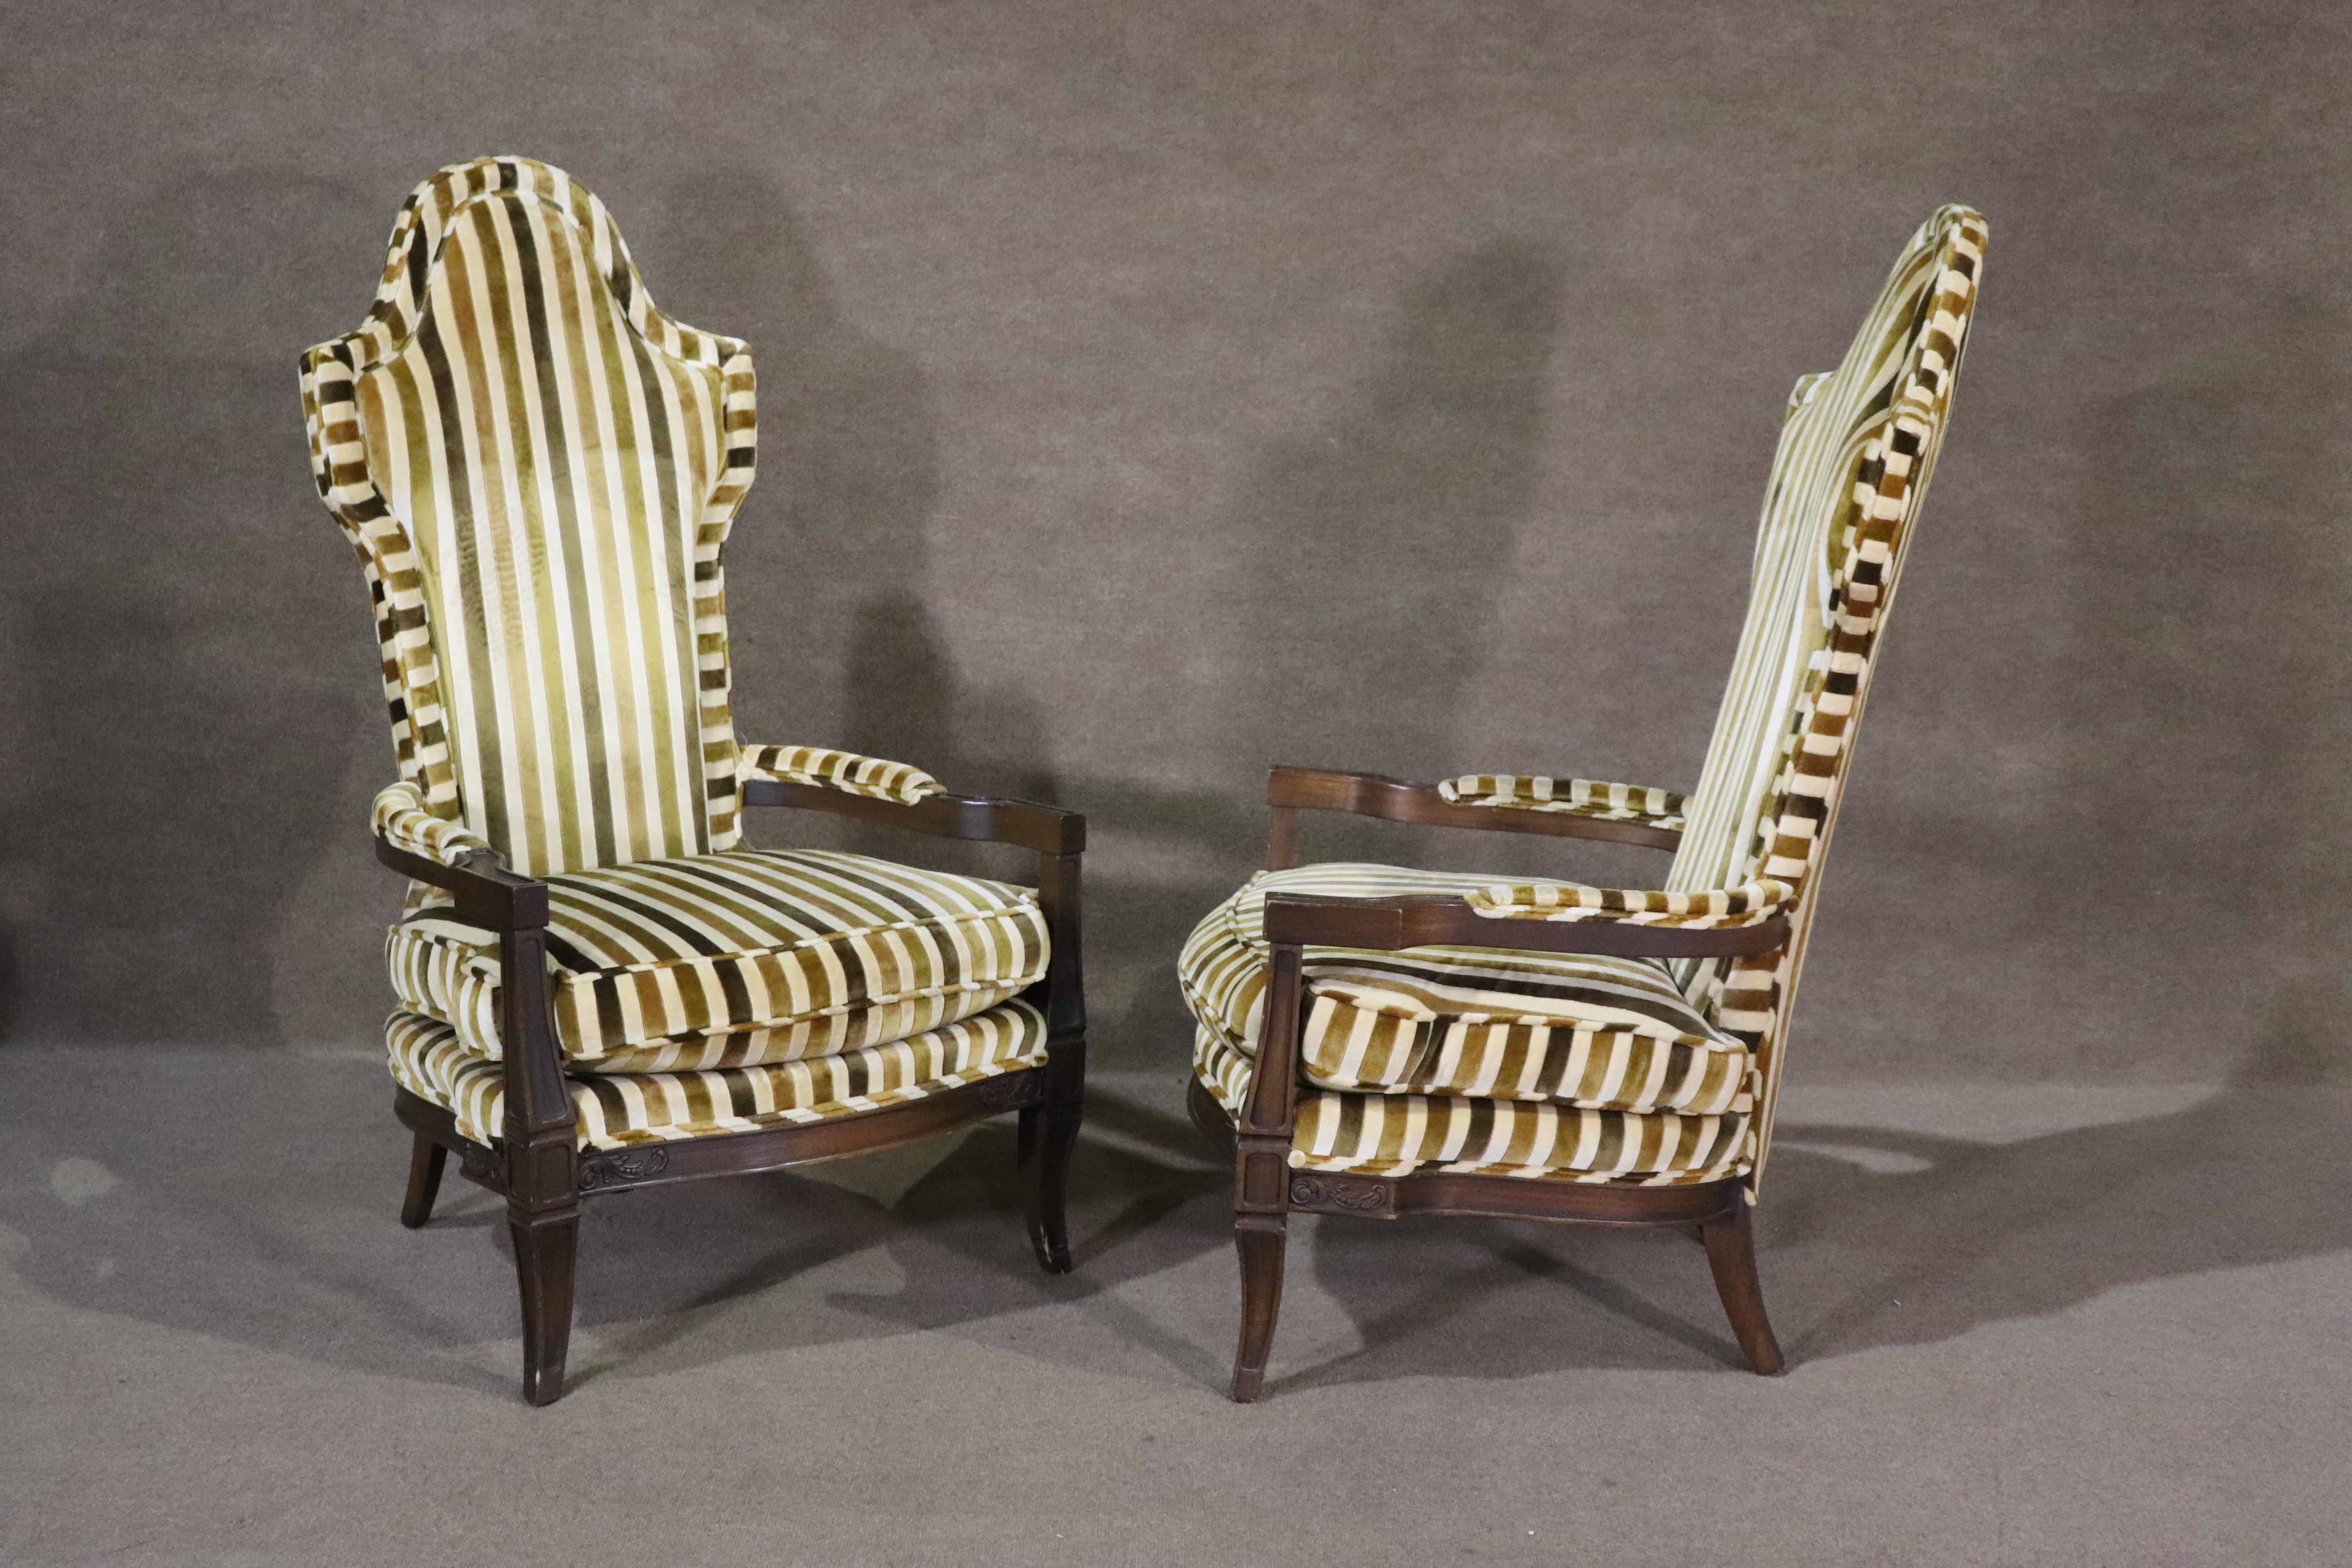 Pair of vintage high back throne chairs with walnut frames. Great form for your living room.
Please confirm location NY or NJ